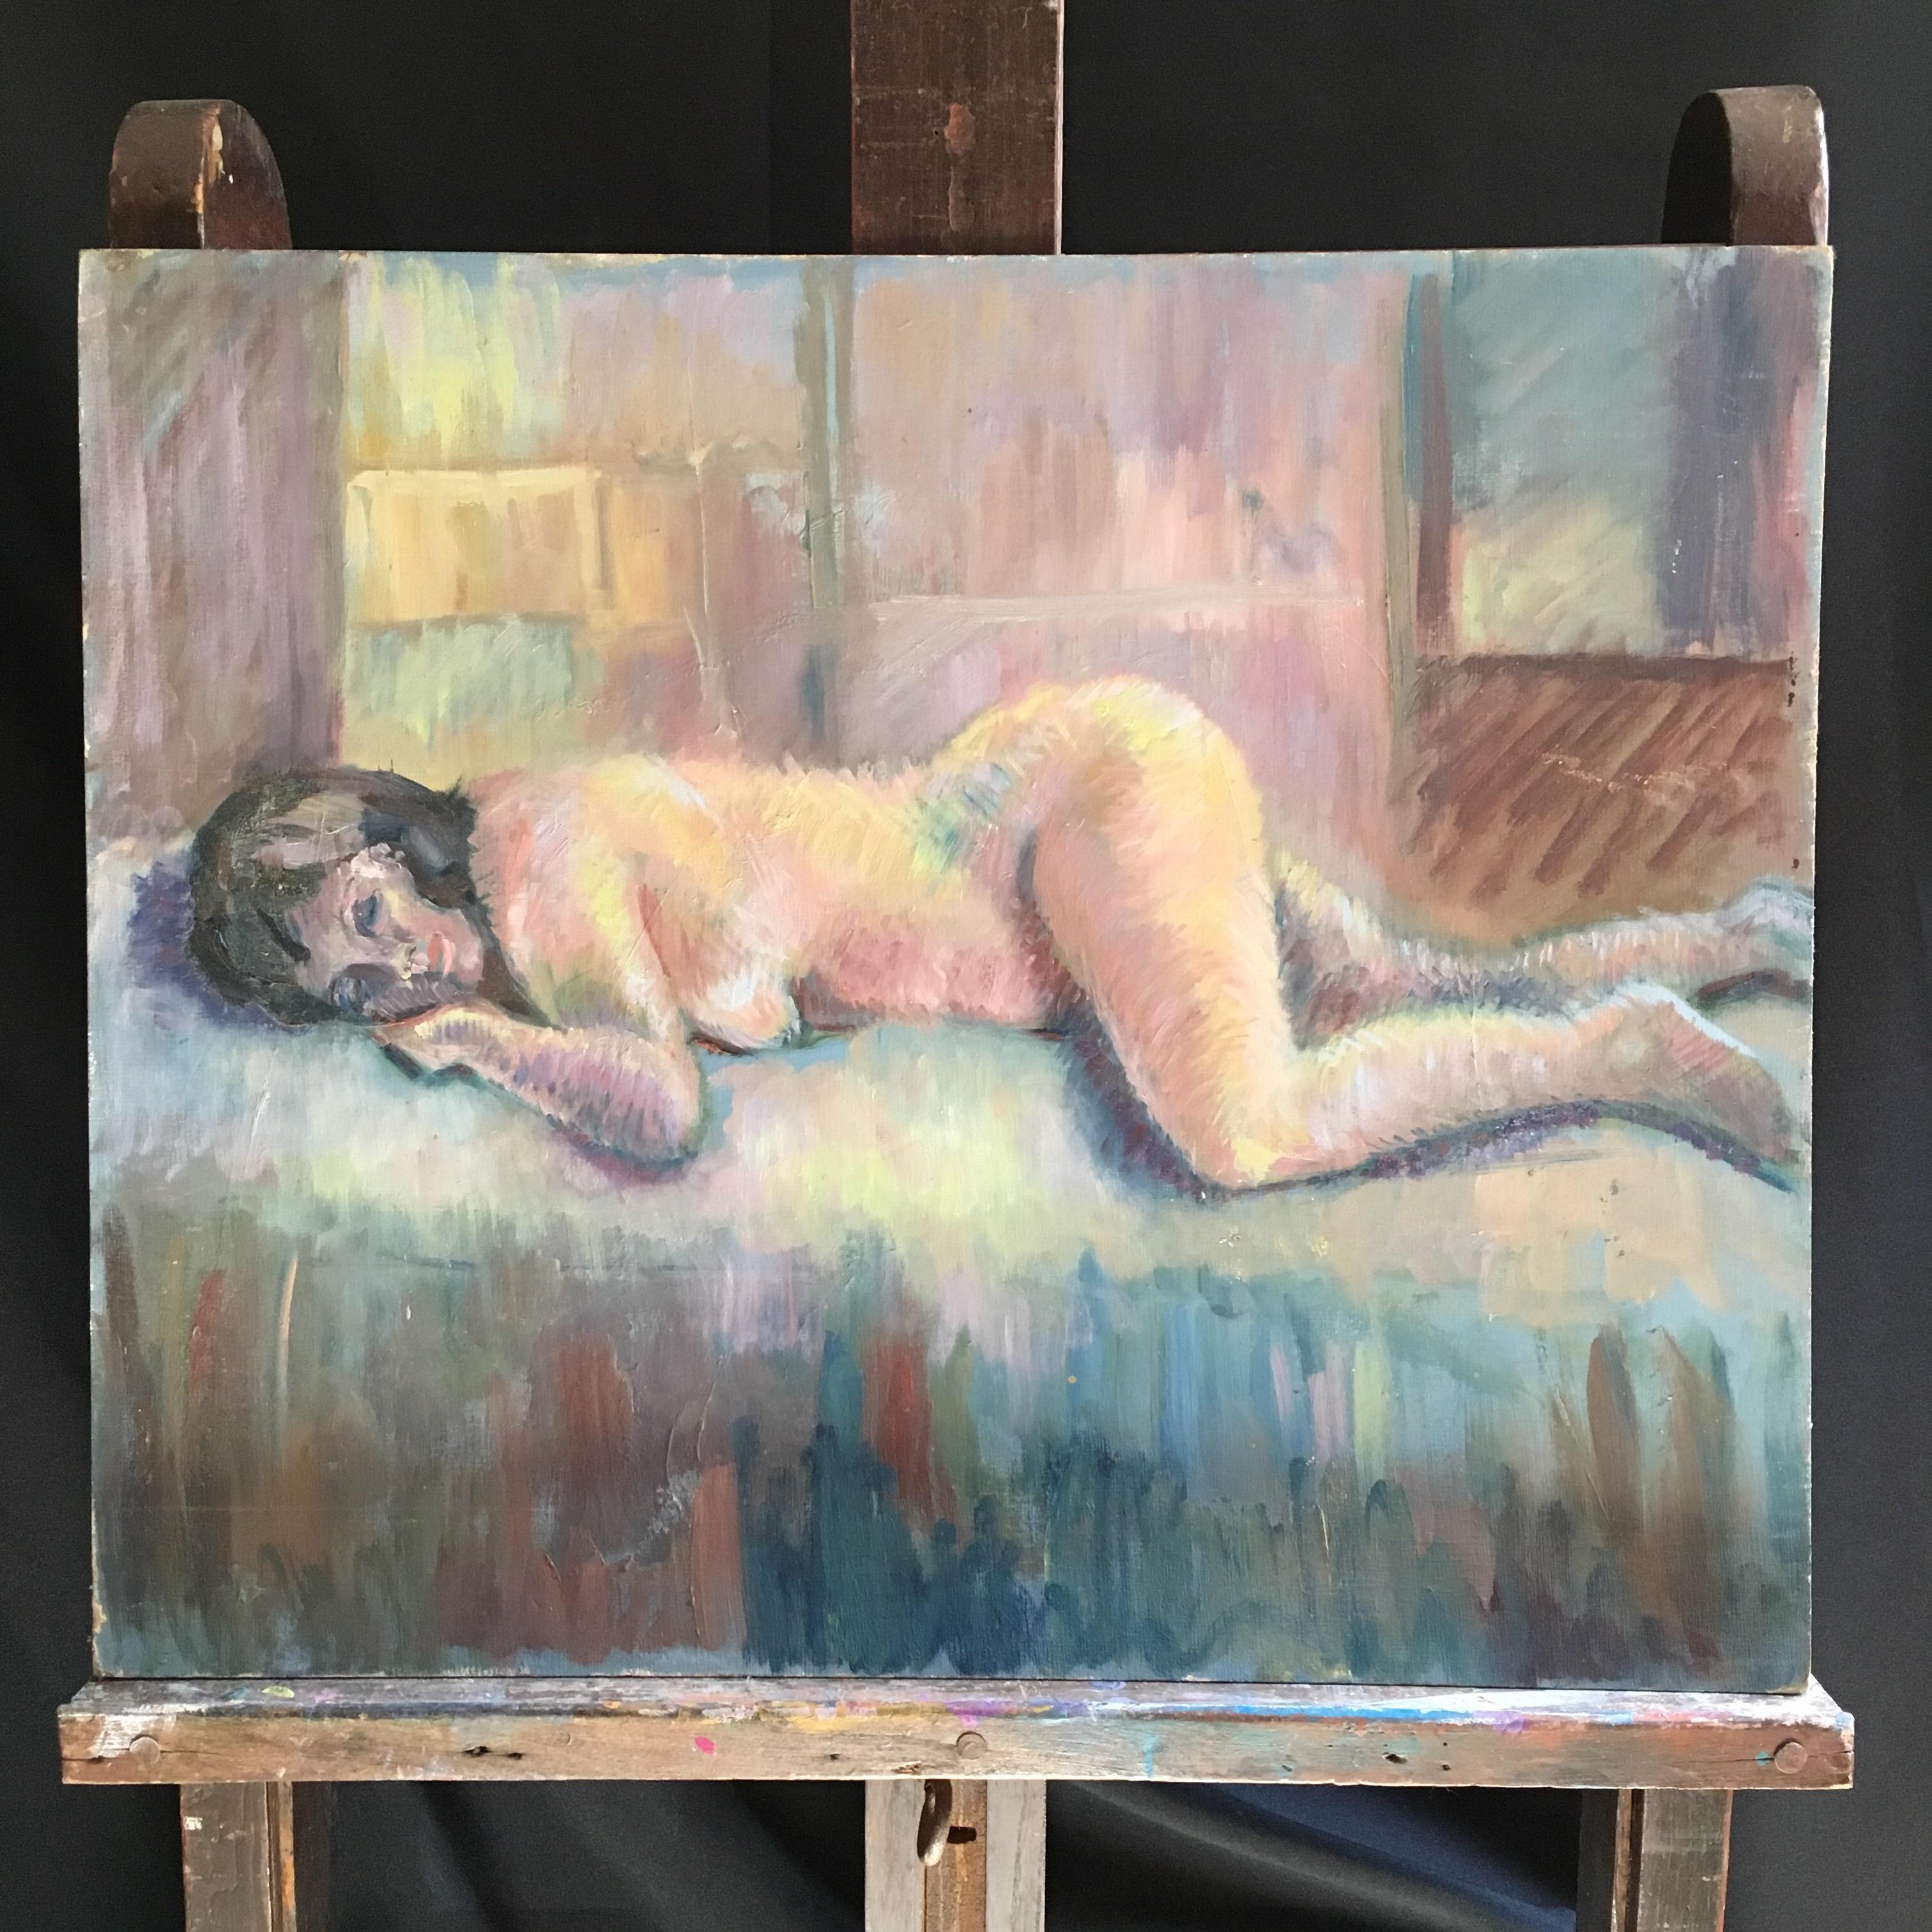 Impressionist Nude, British Artist, Strong Colours, Original Oil Painting
By British artist, Beryl Darton, Mid 20th Century
Oil painting on board, unframed
Board size: 20 x 24 inches

Fabulous large impressionist nude. This is a striking piece of